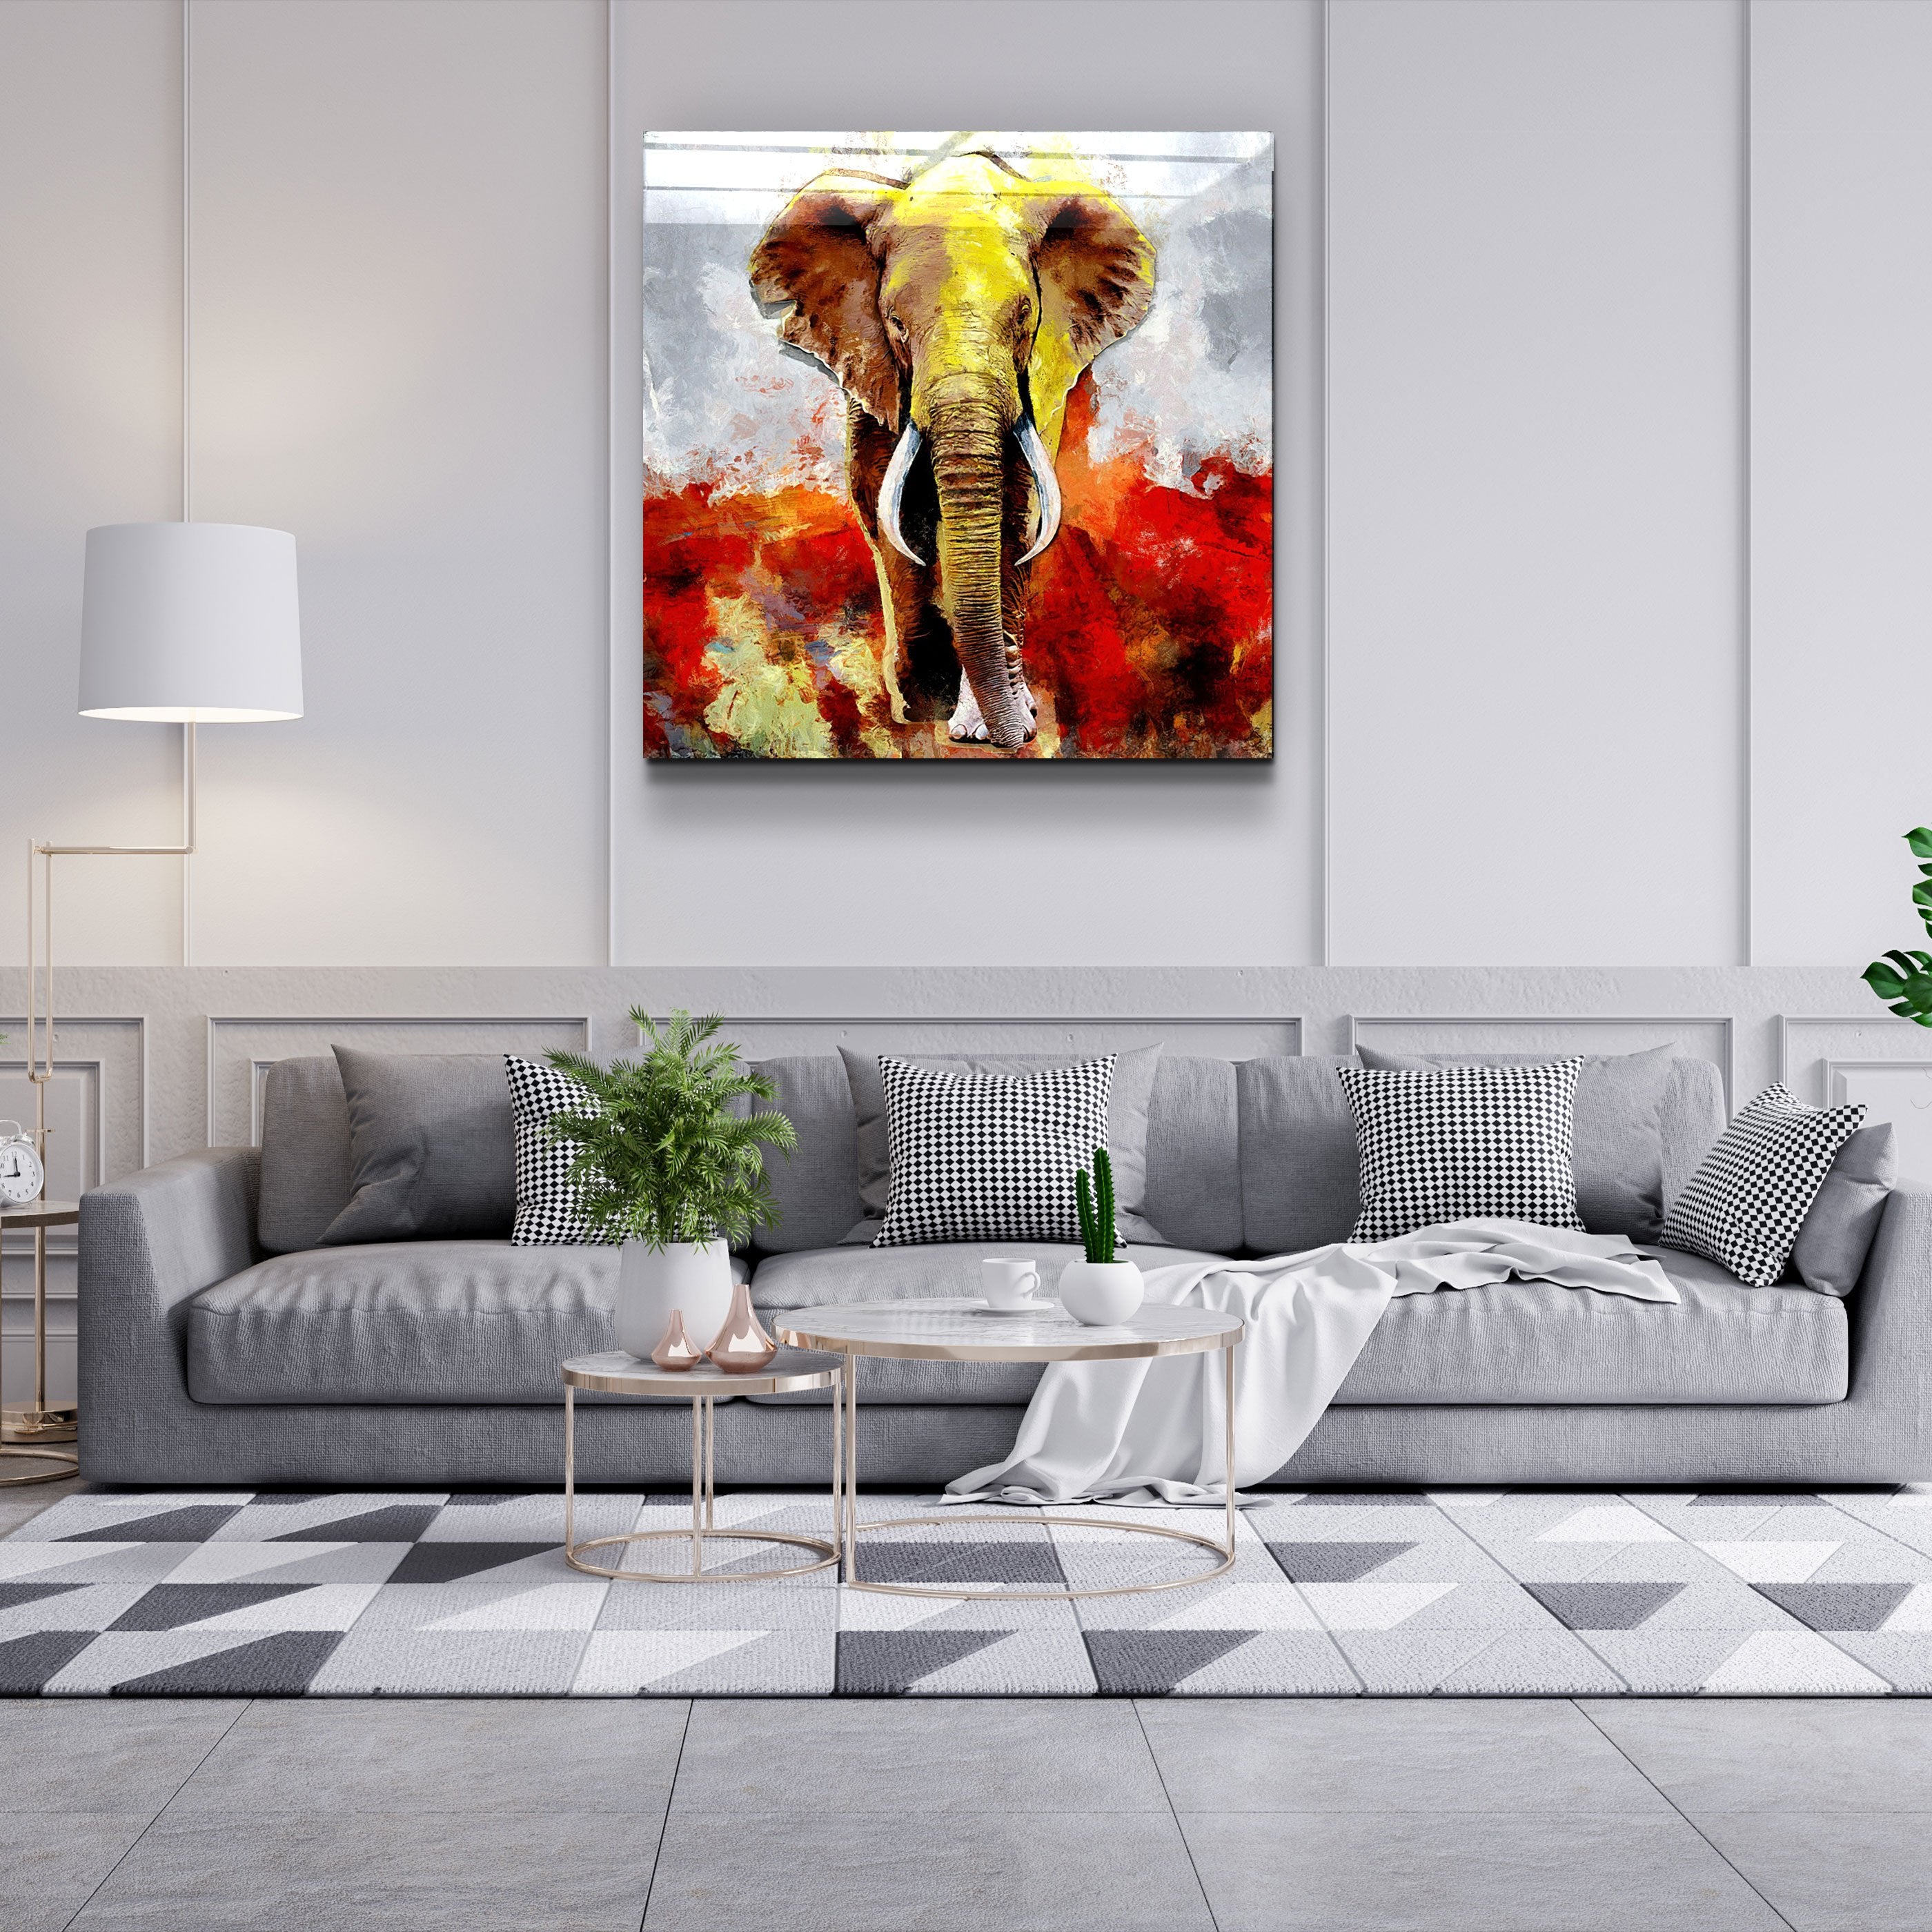 ・"Abstract Colorful Elephant"・Glass Wall Art